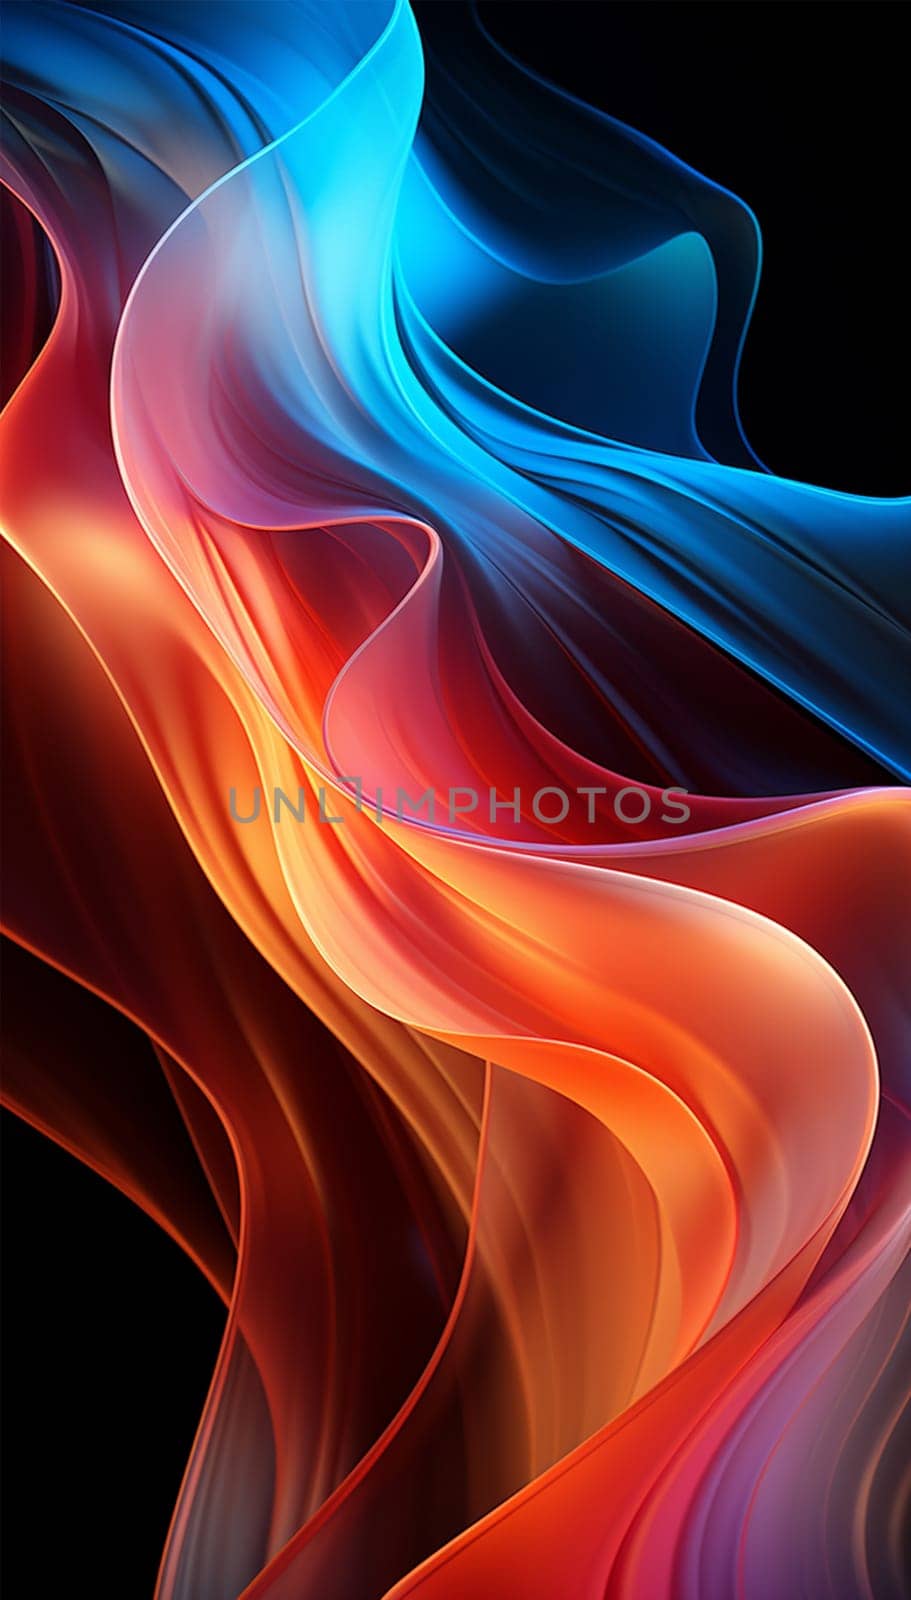 Abstract 3d render. Multicolored waves. Holographic shape in motion. Iridescent gradient digital art for banner background, wallpaper. Transparent glossy design element flying in seascape. Black background Various neon colors by Annebel146